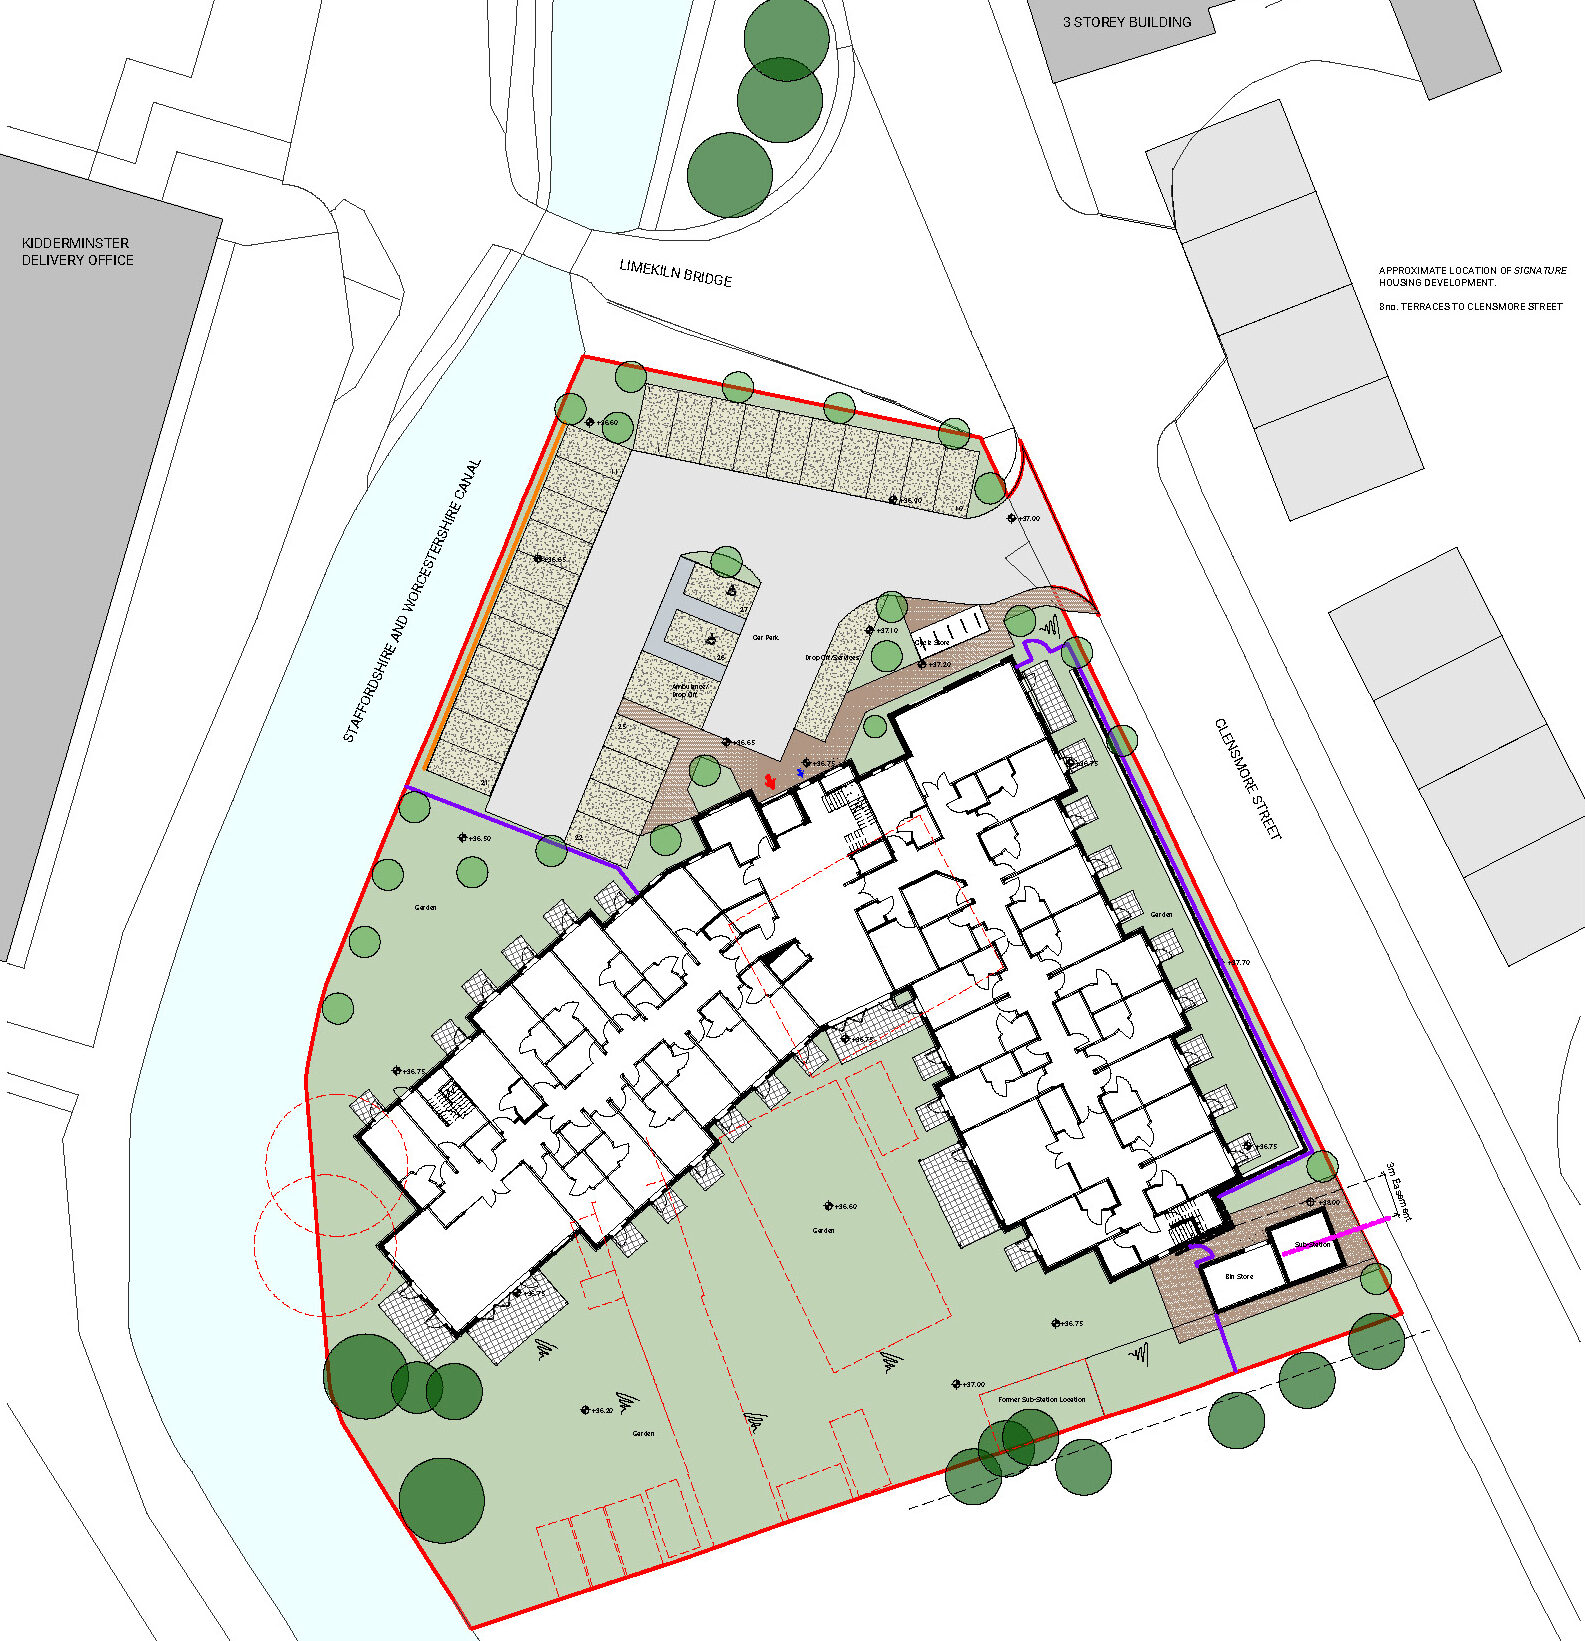 Care Home in Kidderminster - Site Plan